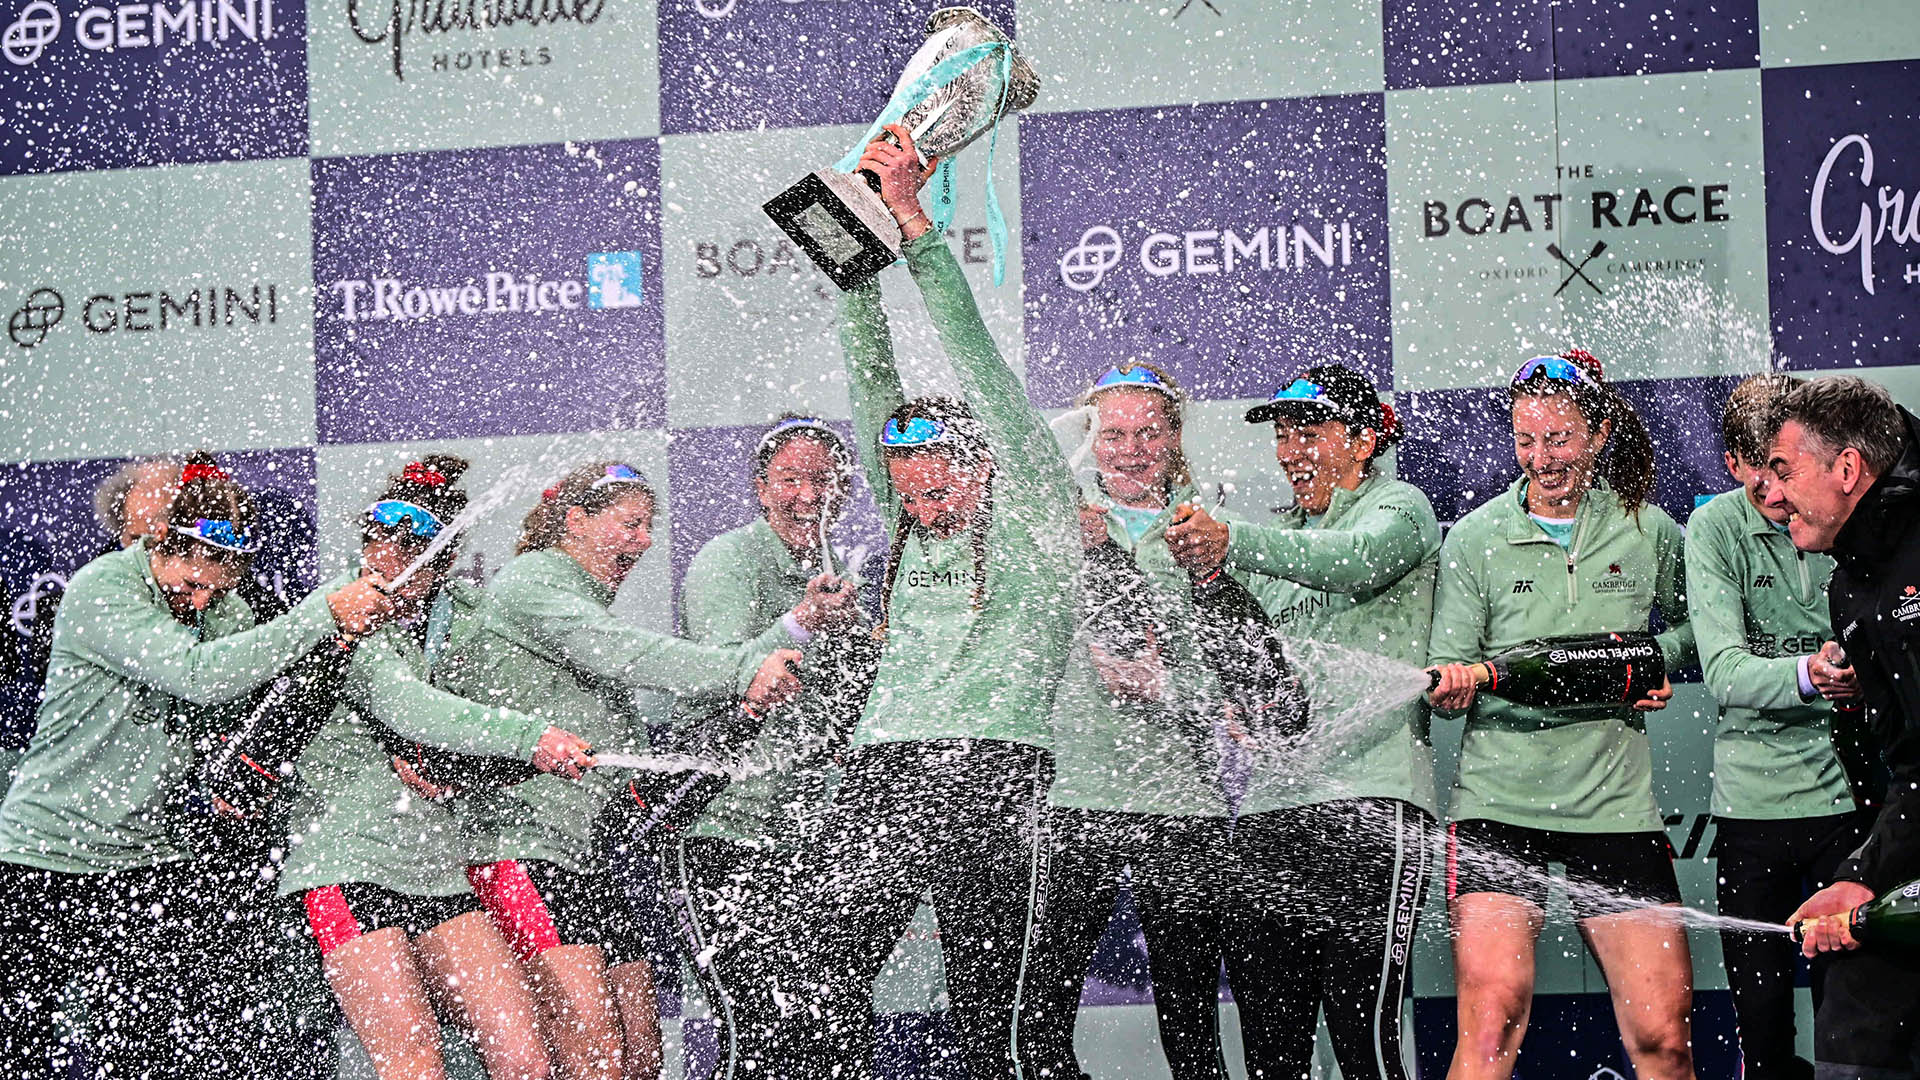 Pure happiness for the Cambridge women's rowing team. They won first and then the men.